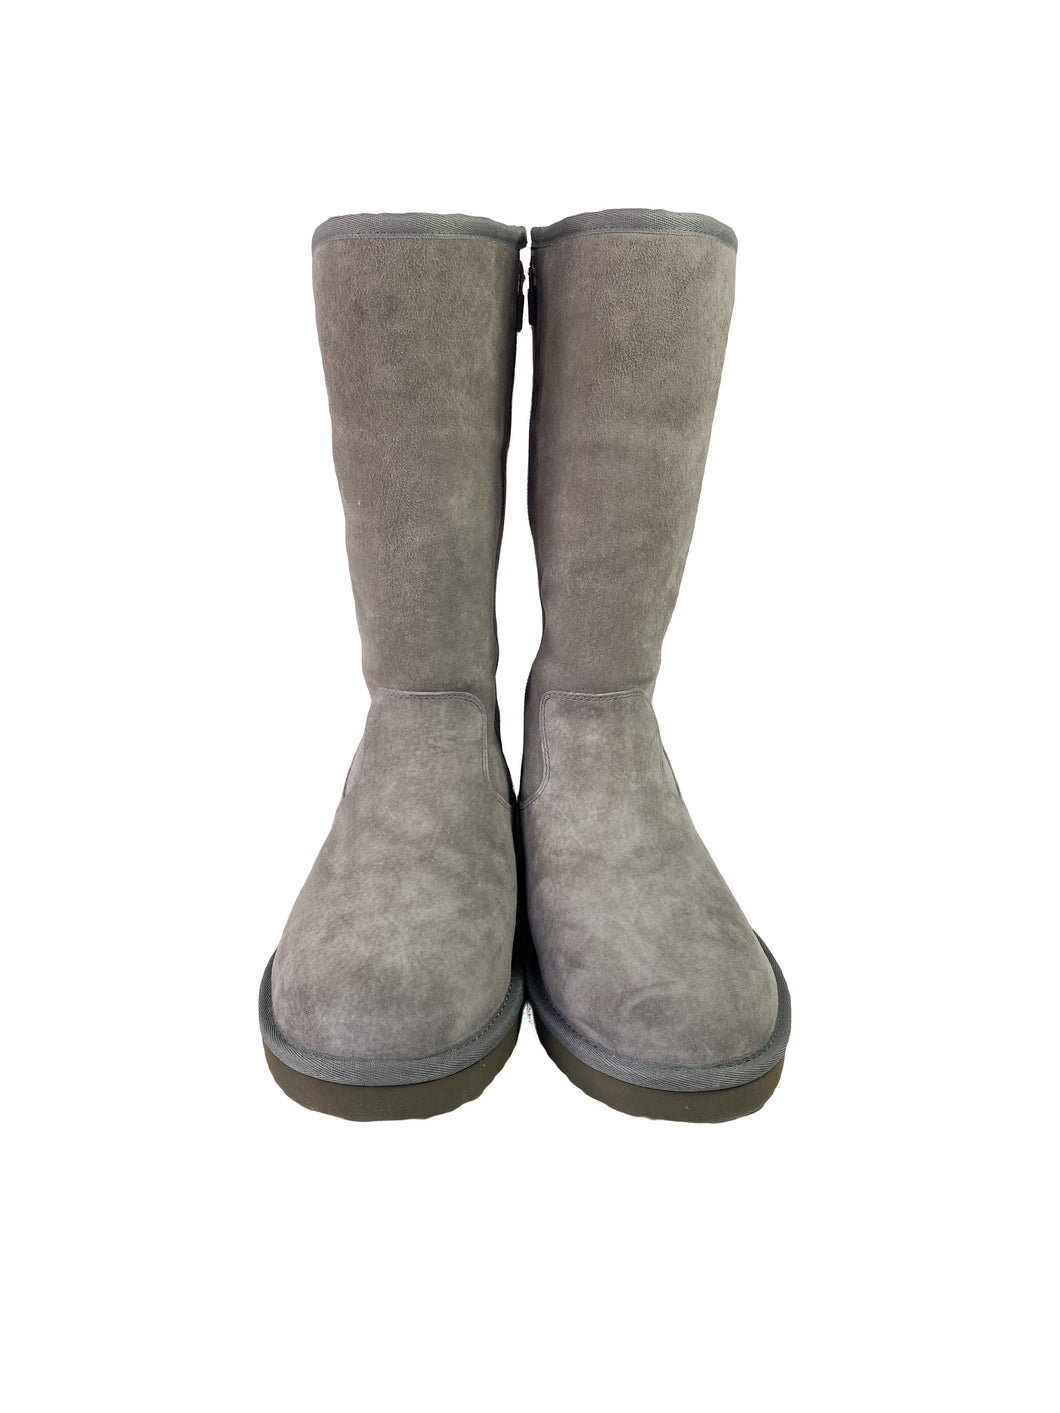 UGG gray suede tall zip boots size 8 NEW